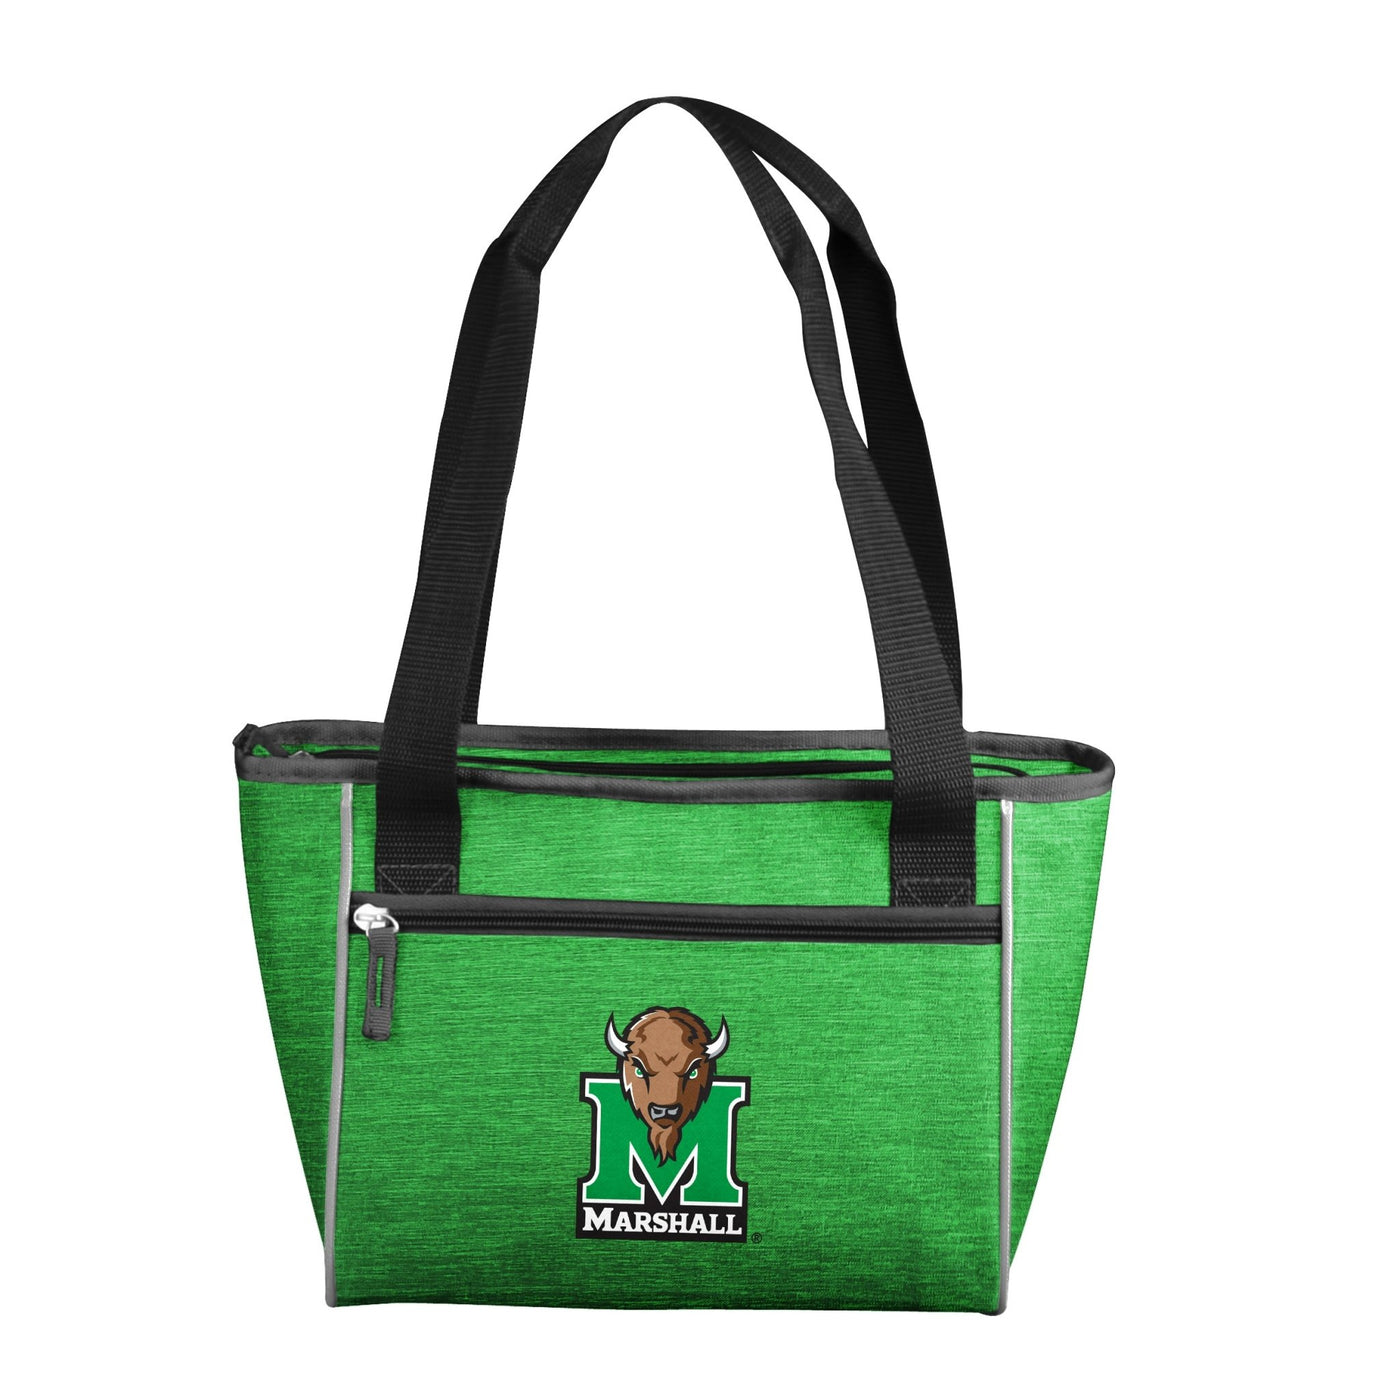 Marshall Crosshatch 16 Can Cooler Tote - Logo Brands